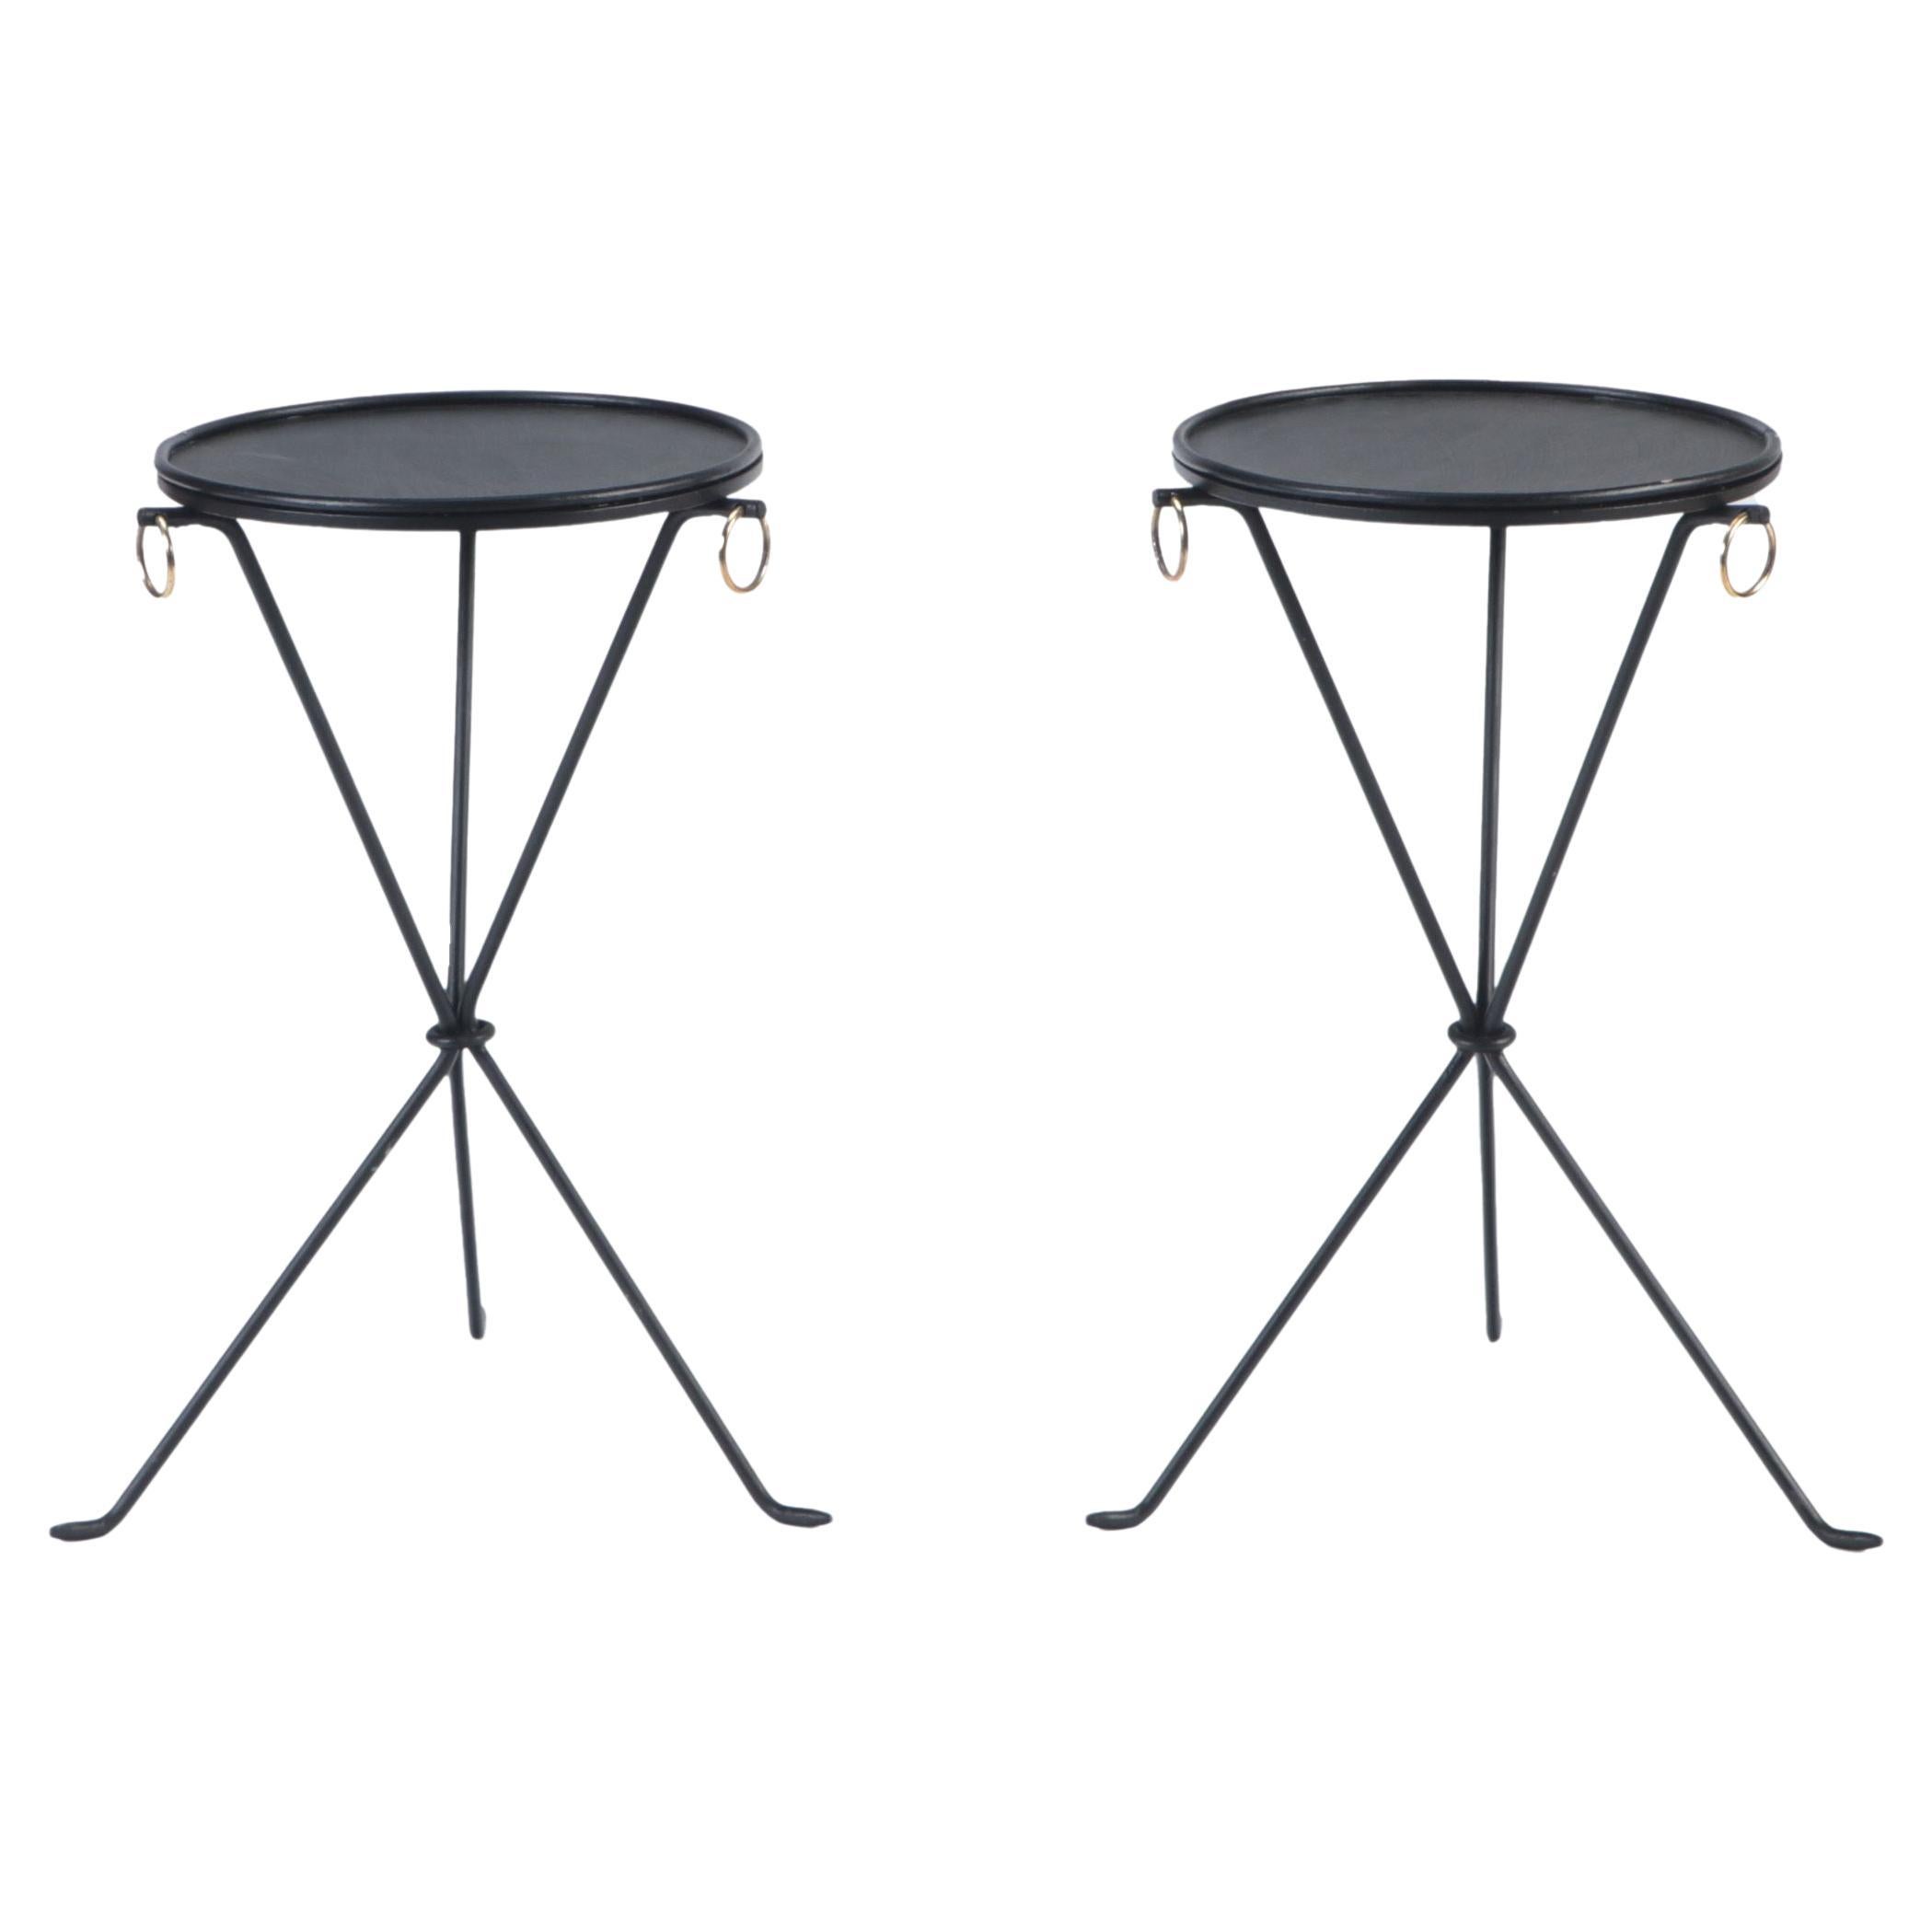 Pair of Wrought Iron Drink Tables, Contemporary